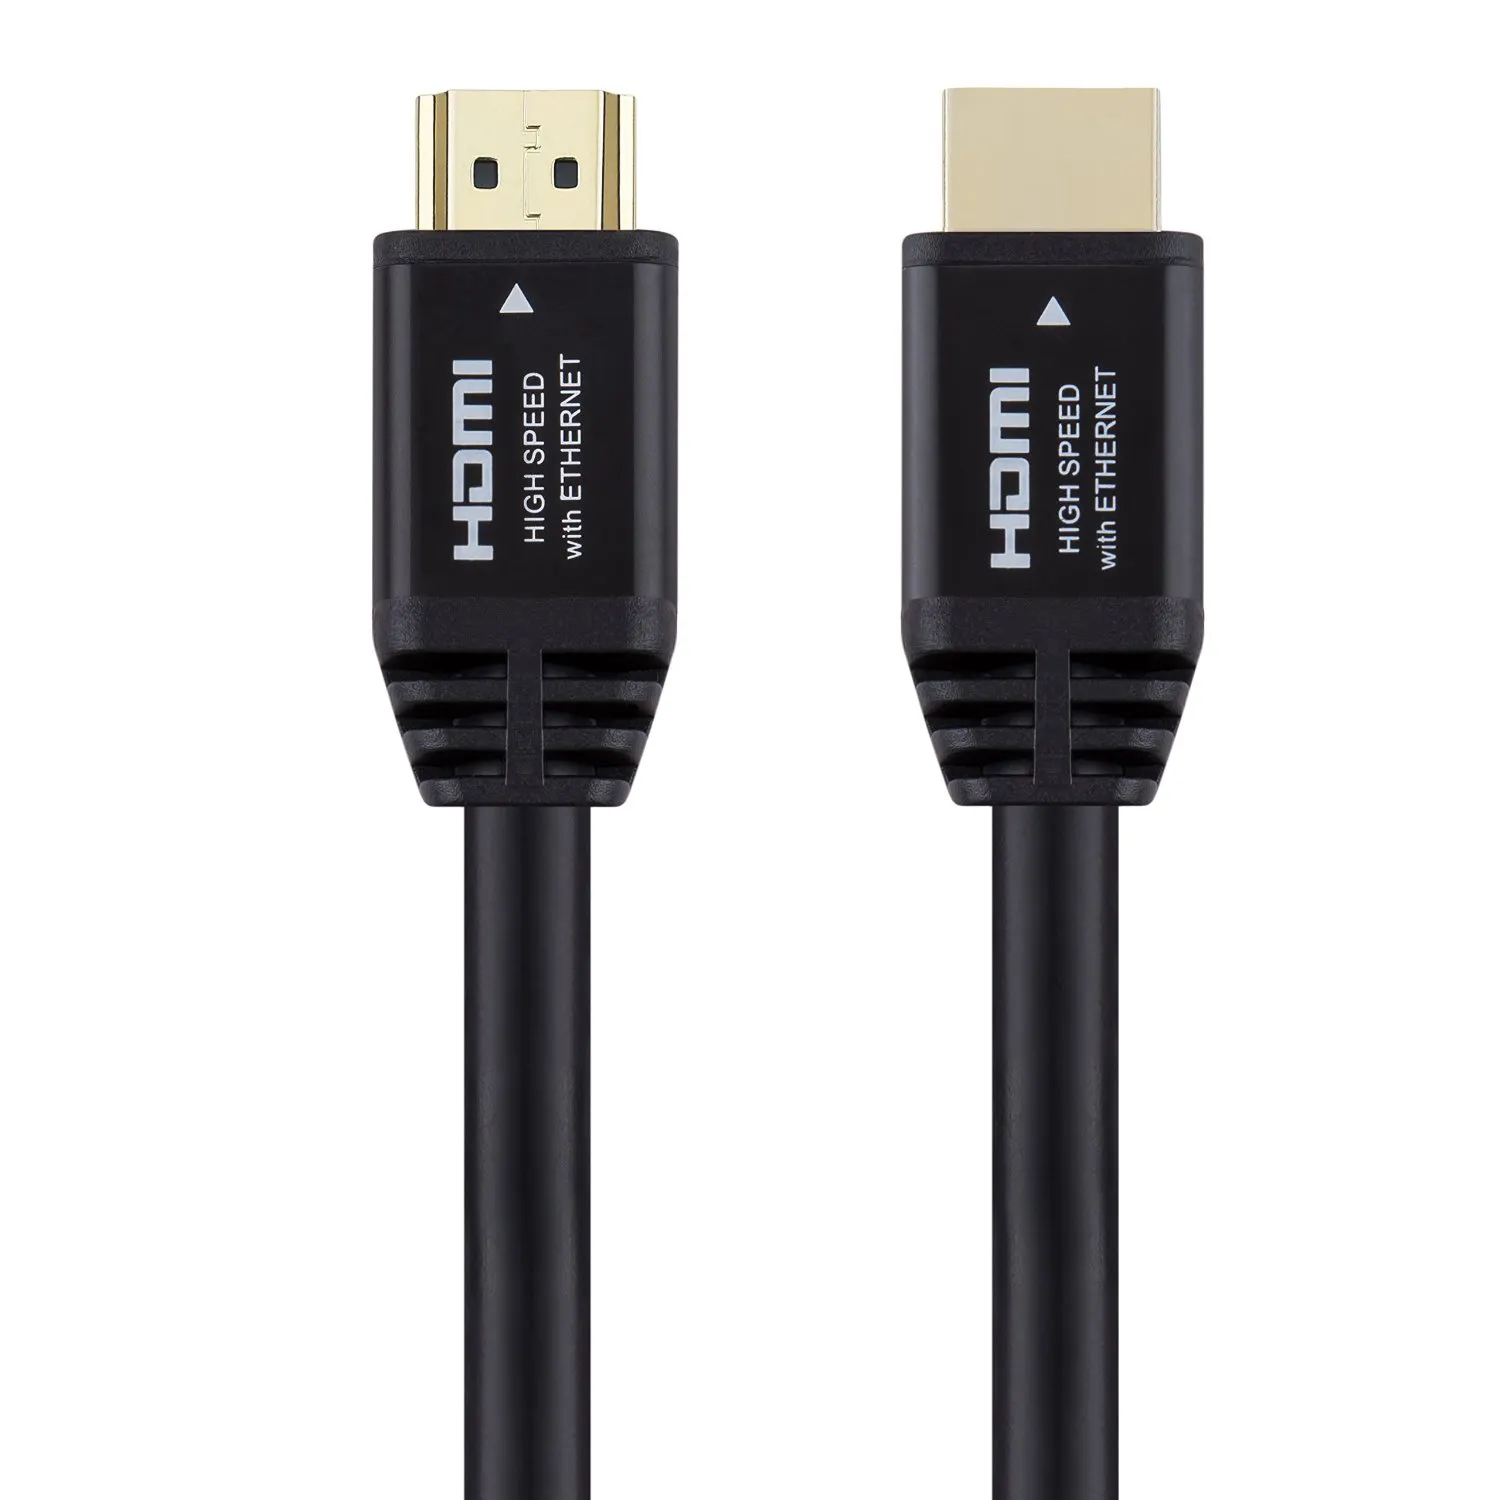 Hdmi Cable Hot Selling 1M 2160p High Resolution Black 4k 60hz At 18gbps For Hdtv Ps3/4 HDMI Kabel